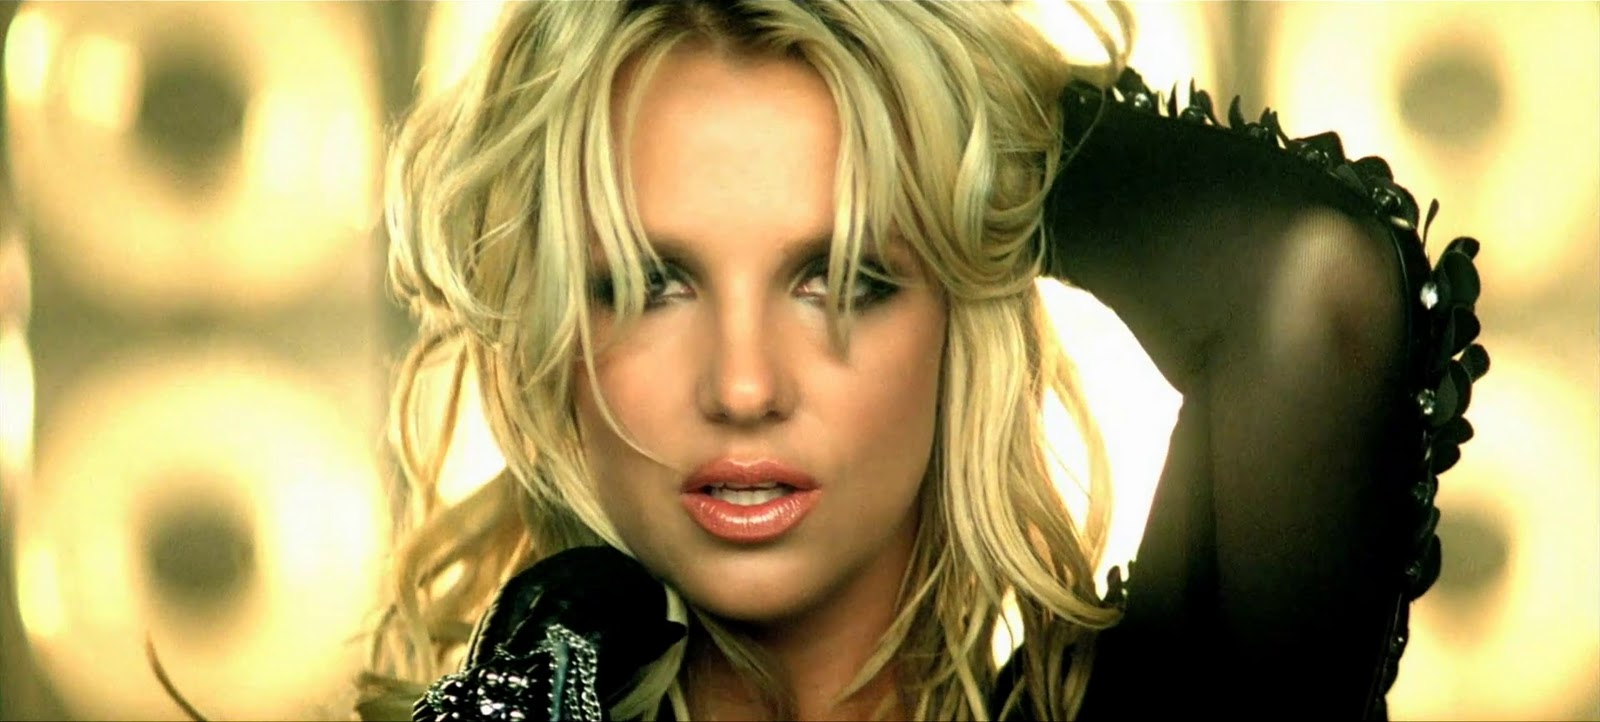 Britney Spears Till The World Ends Dance Video